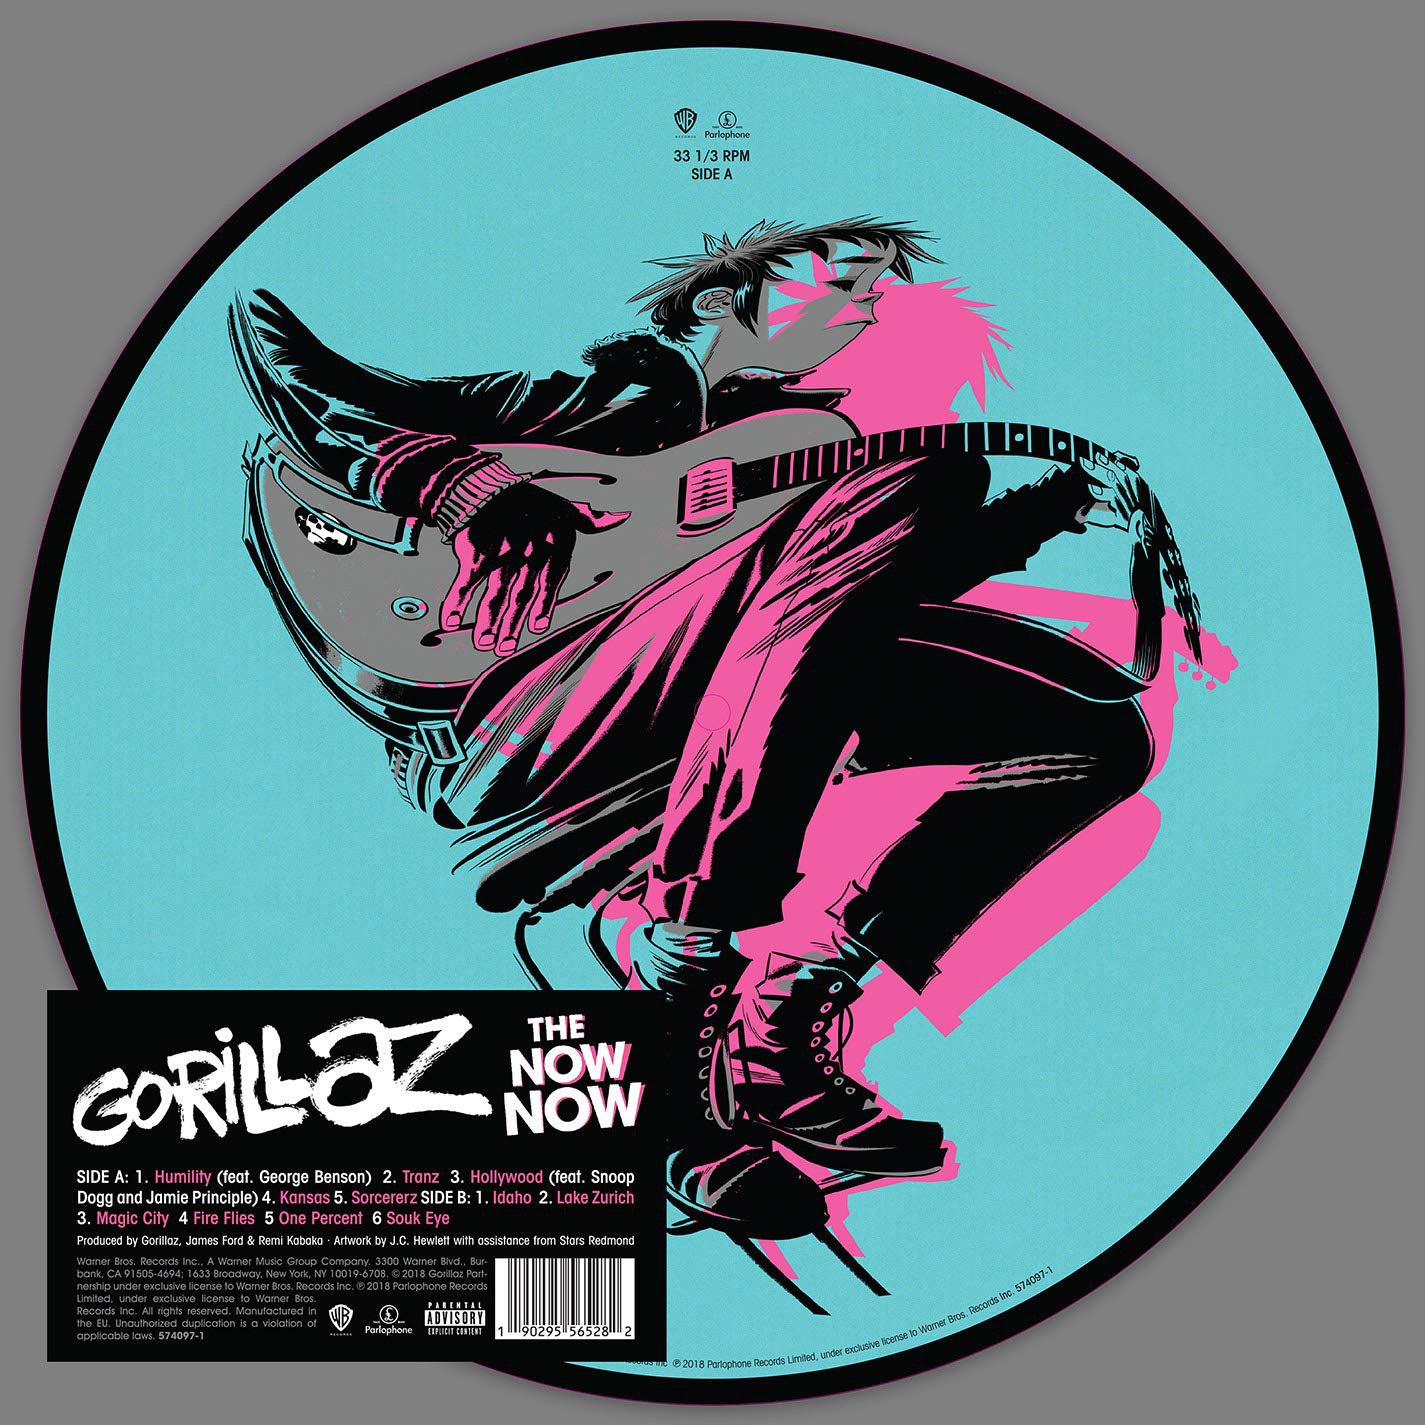 Gorillaz - The Now Now (Picture Disc)